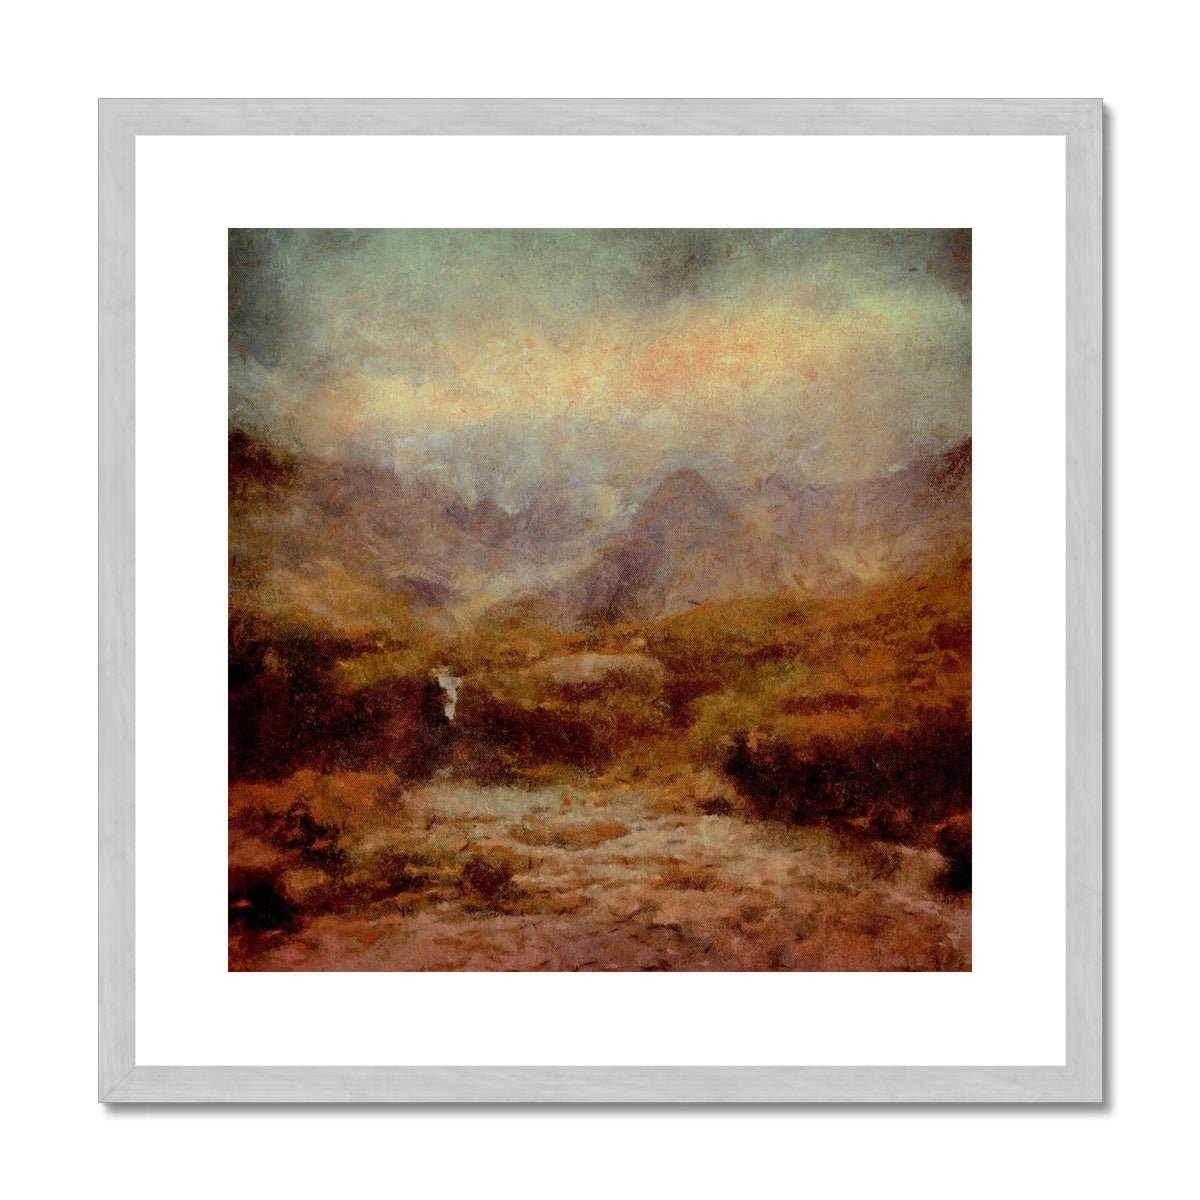 The Brooding Fairy Pools Skye Painting | Antique Framed & Mounted Prints From Scotland-Antique Framed & Mounted Prints-Skye Art Gallery-20"x20"-Silver Frame-Paintings, Prints, Homeware, Art Gifts From Scotland By Scottish Artist Kevin Hunter